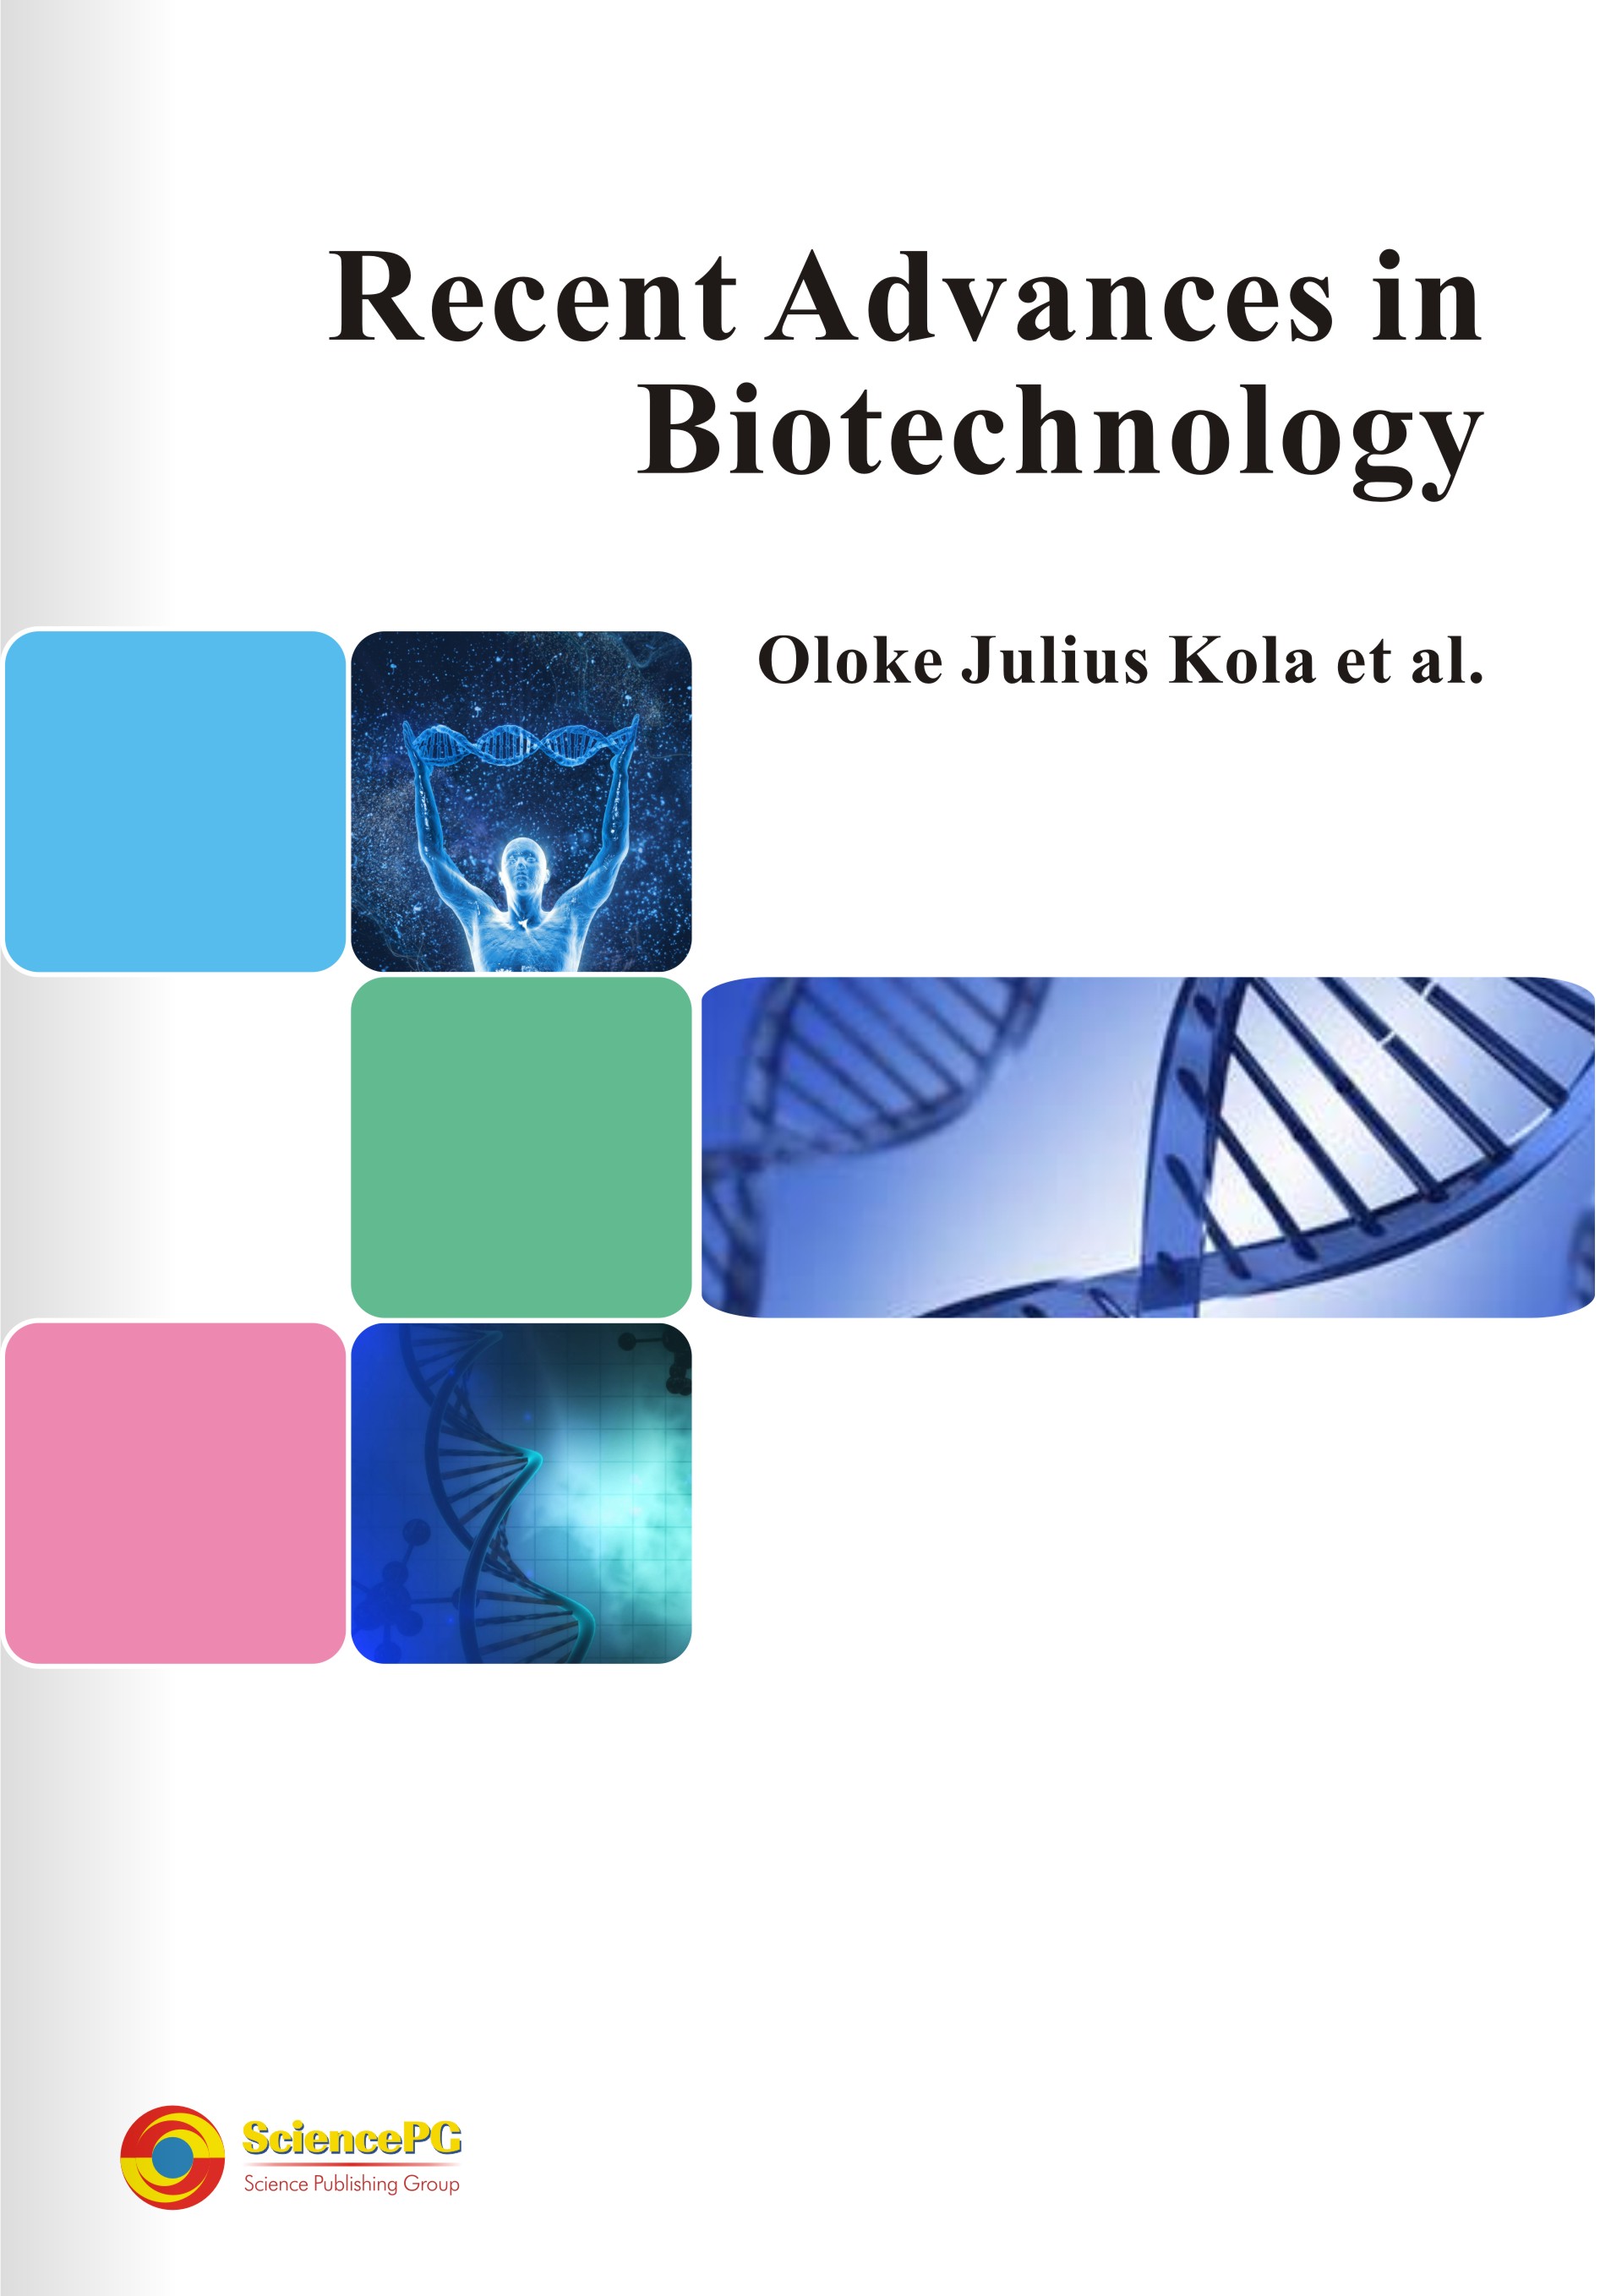 Recent Advances in BiotechnologyBook Science Publishing Group